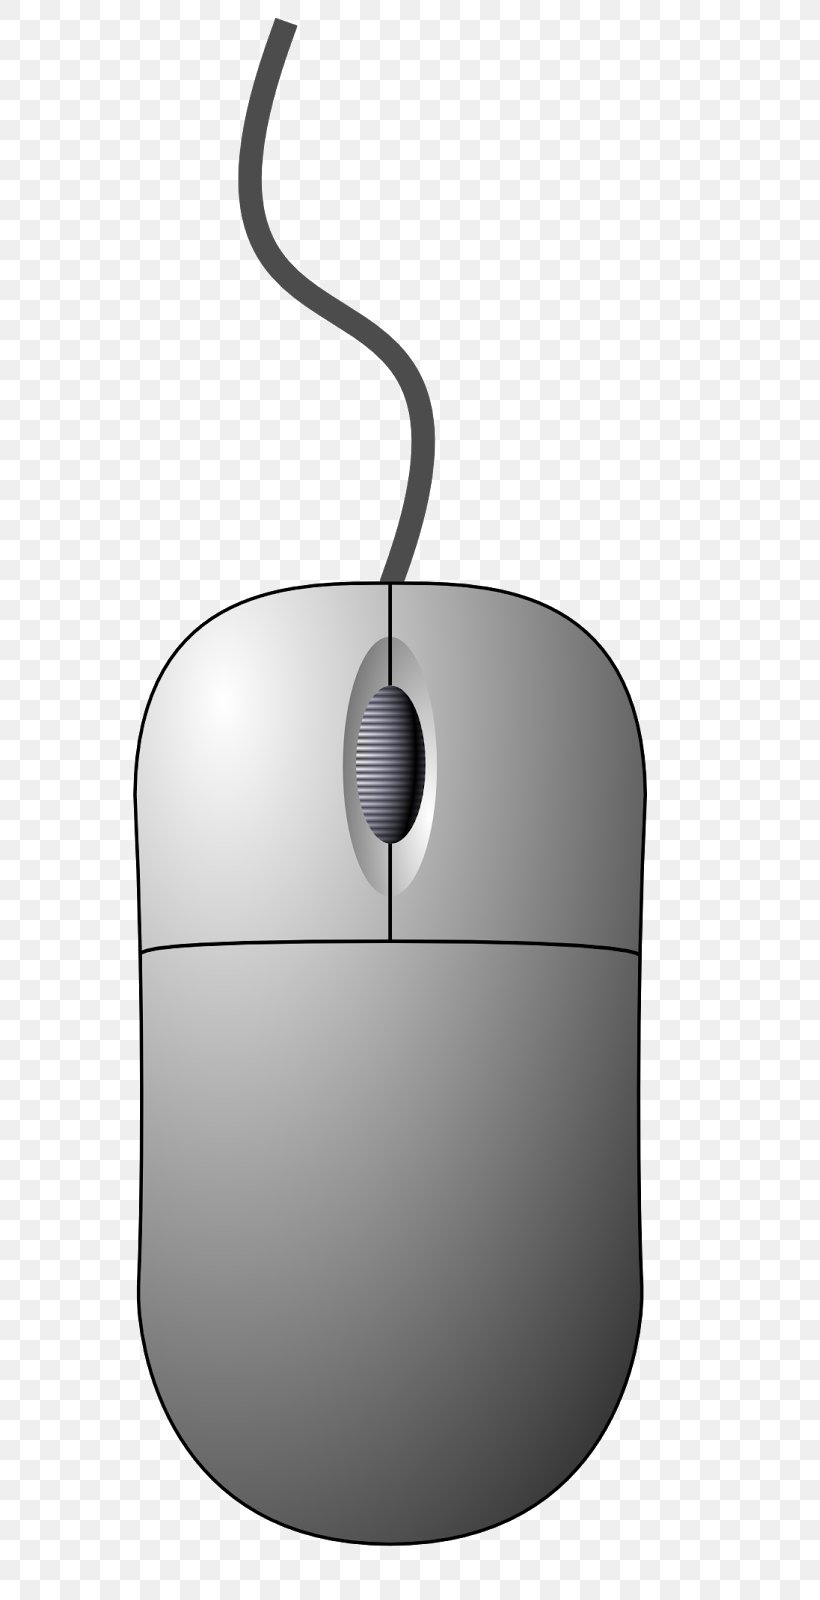 Computer Mouse Pointer Clip Art, PNG, 747x1600px, Computer Mouse, Computer, Computer Accessory, Computer Component, Drag And Drop Download Free